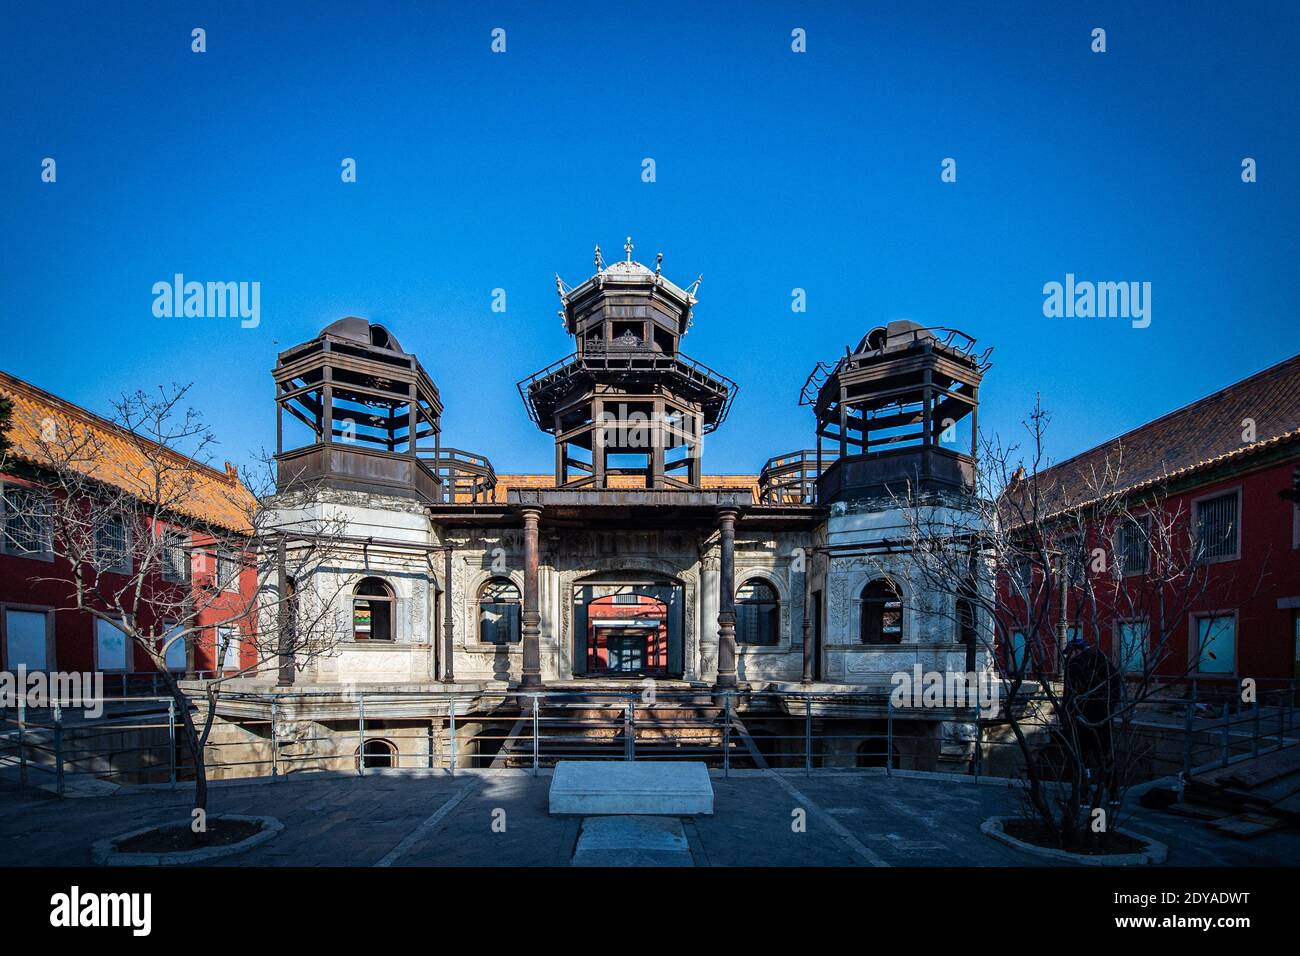 The Palace of Prolonged Happiness, one of the eastern six palaces of the Palace Museum reopens in Dongcheng district, Beijing, China, 22 December 2020 Stock Photo